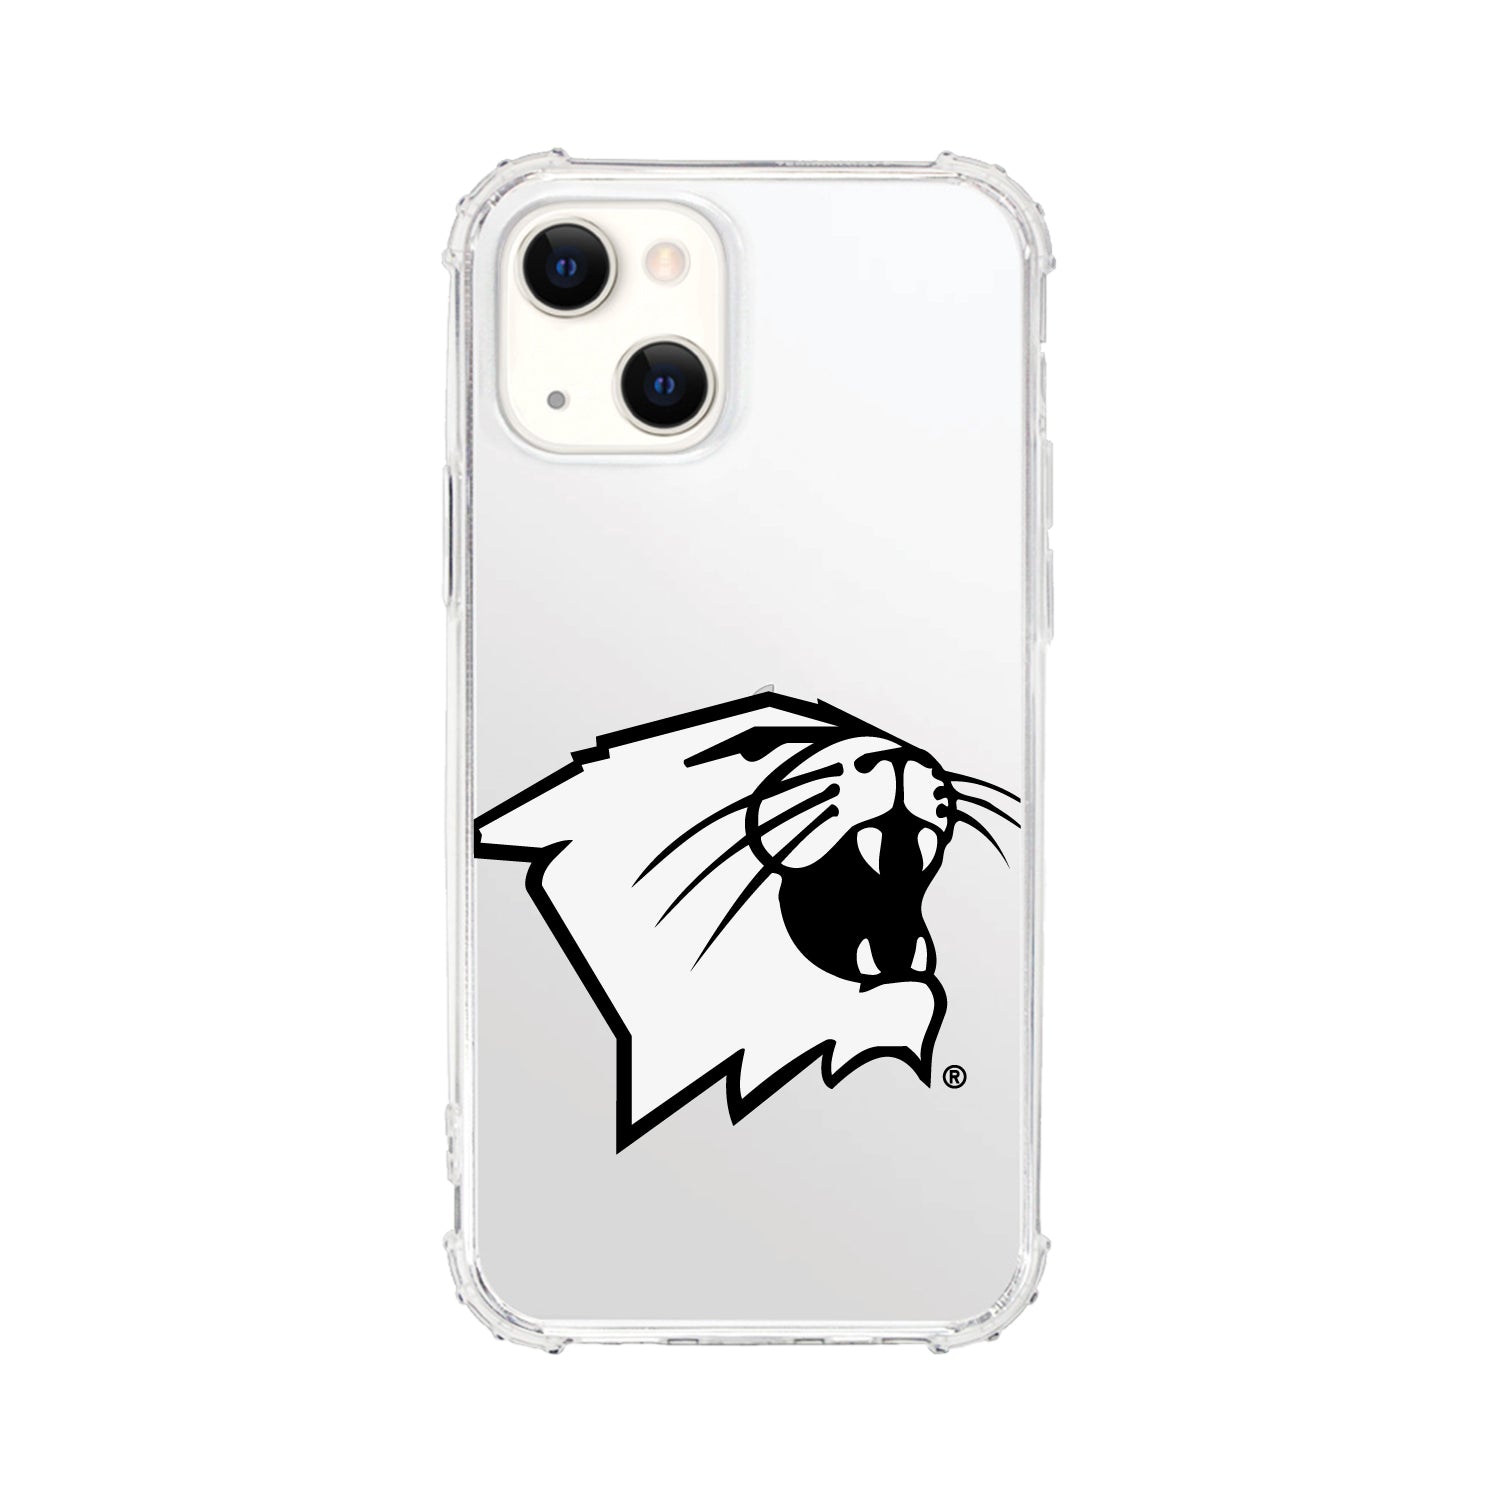 UNIVERSITY OF LOUISVILLE CARDINALS iPhone 13 Pro Max Case Cover